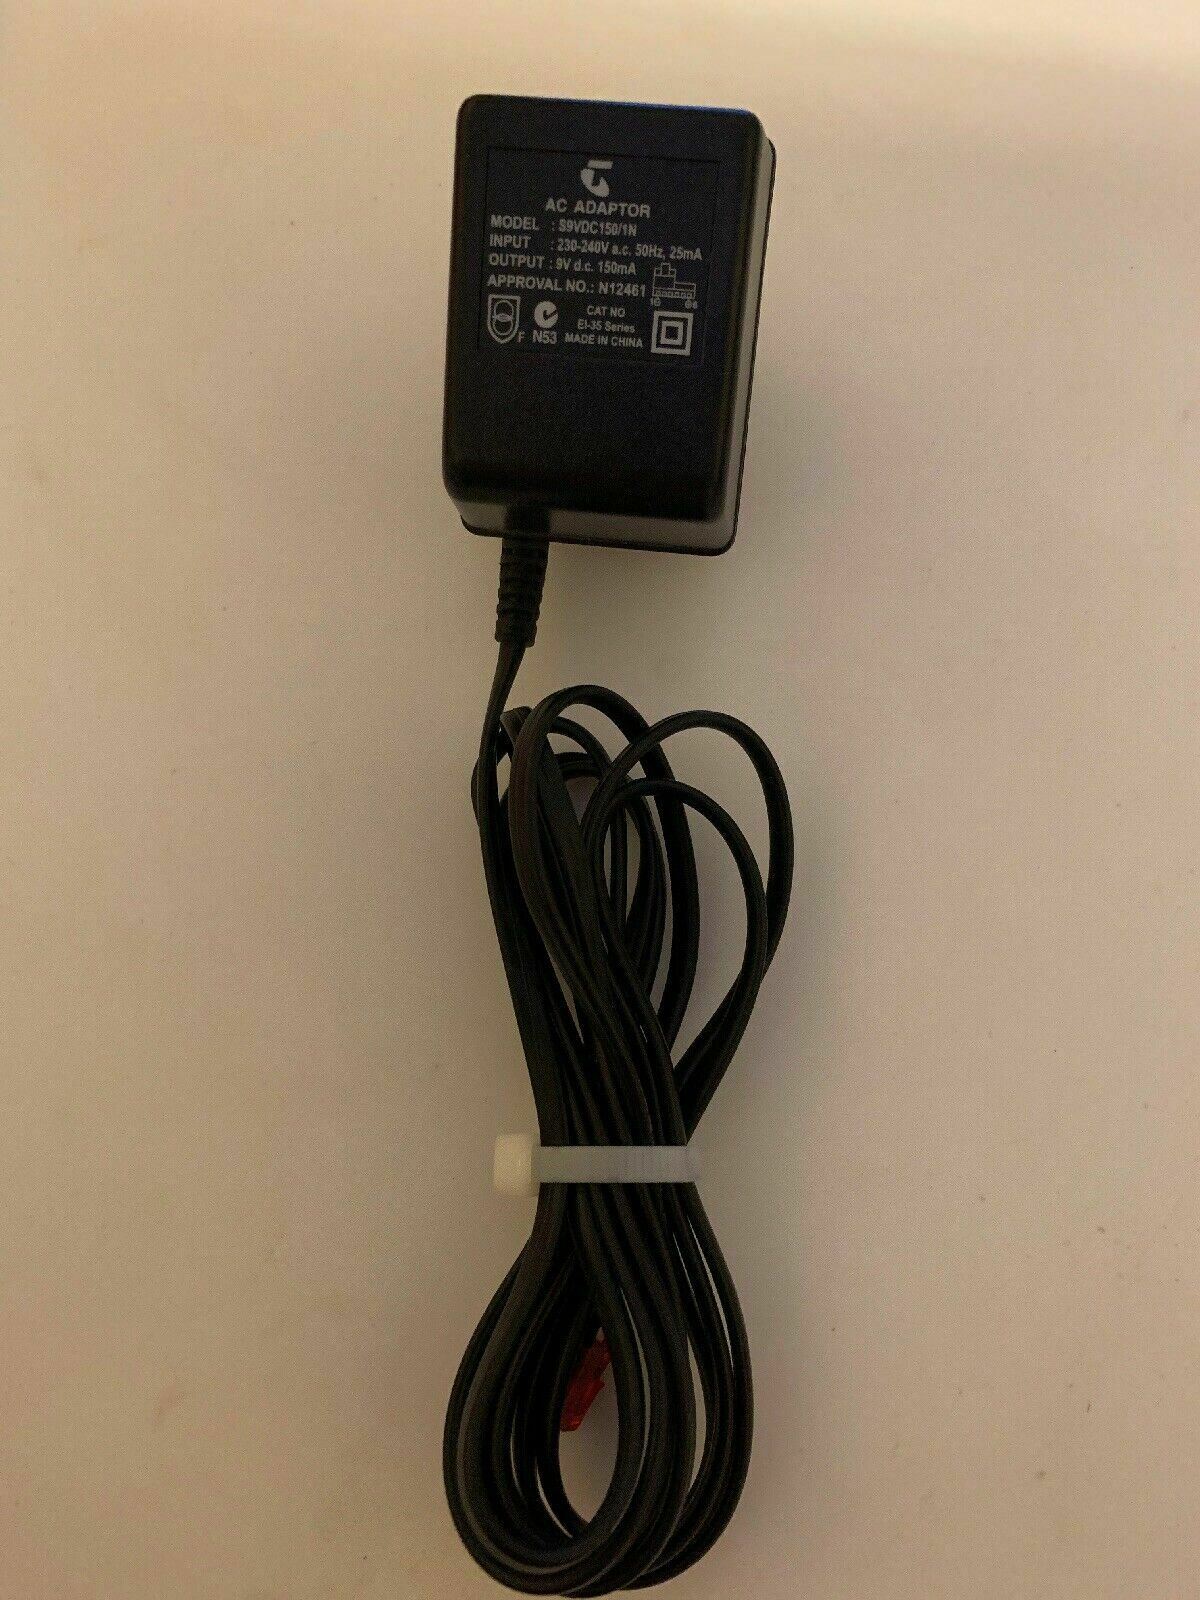 Genuine Telstra AC Adaptor S9VDC150/1N 9V 150mA Power Supply Compatible Brand: Telstra Type: AC/DC Adapter Compatib - Click Image to Close